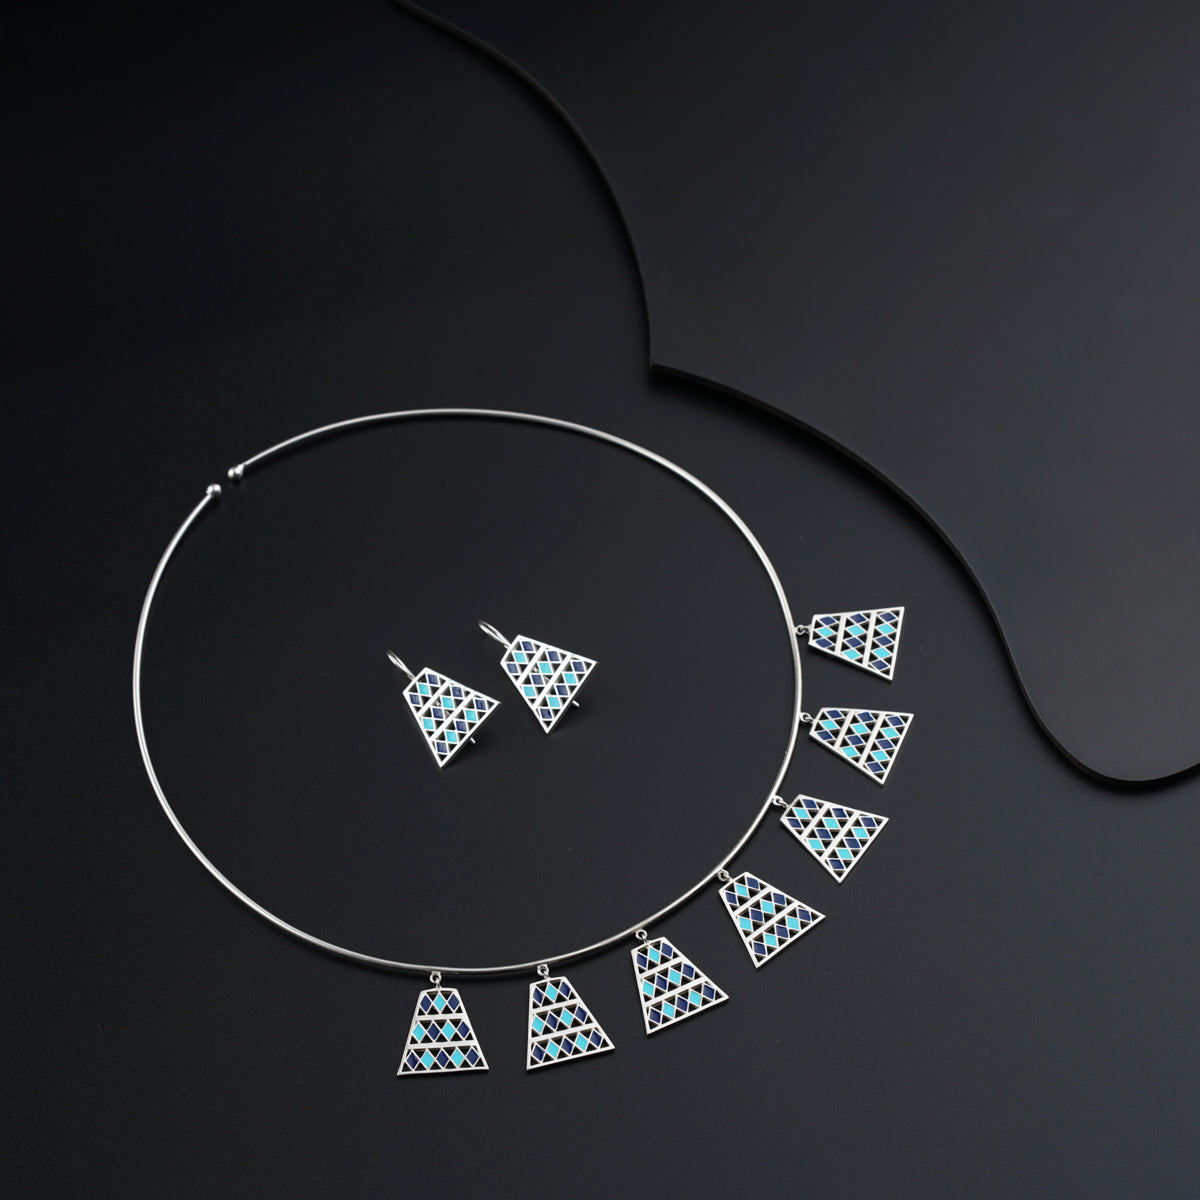 a necklace and earring made of silver and blue glass